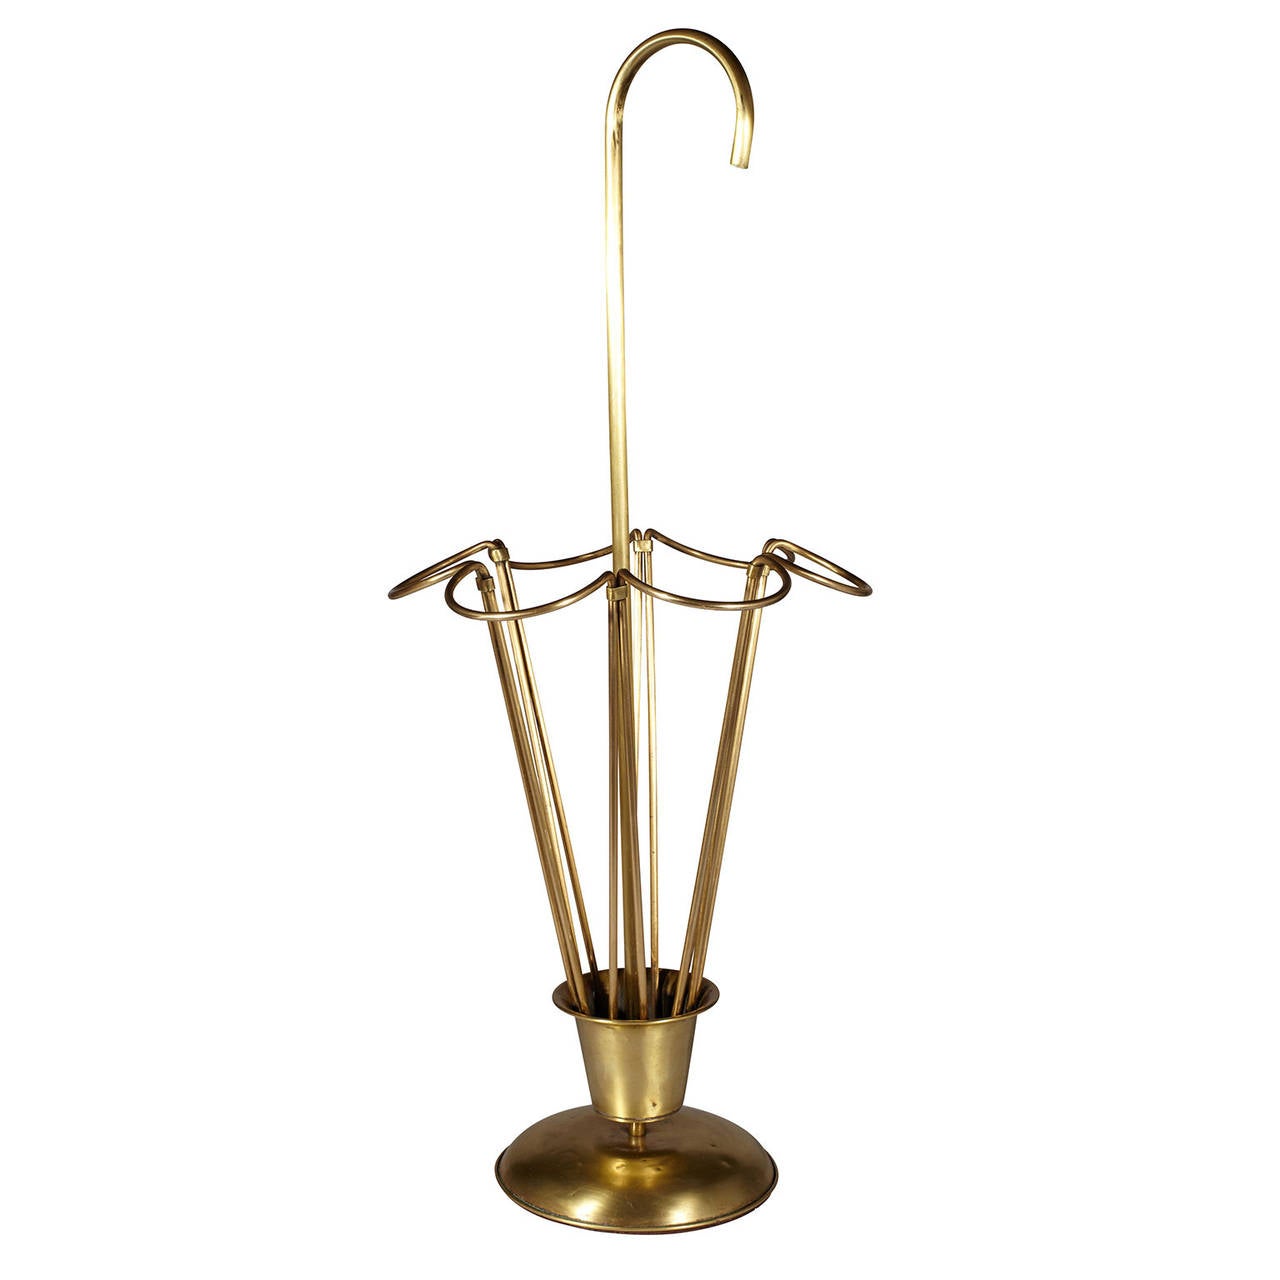 A beautiful antique brass umbrella stand in the form of an umbrella. Newly Polished.